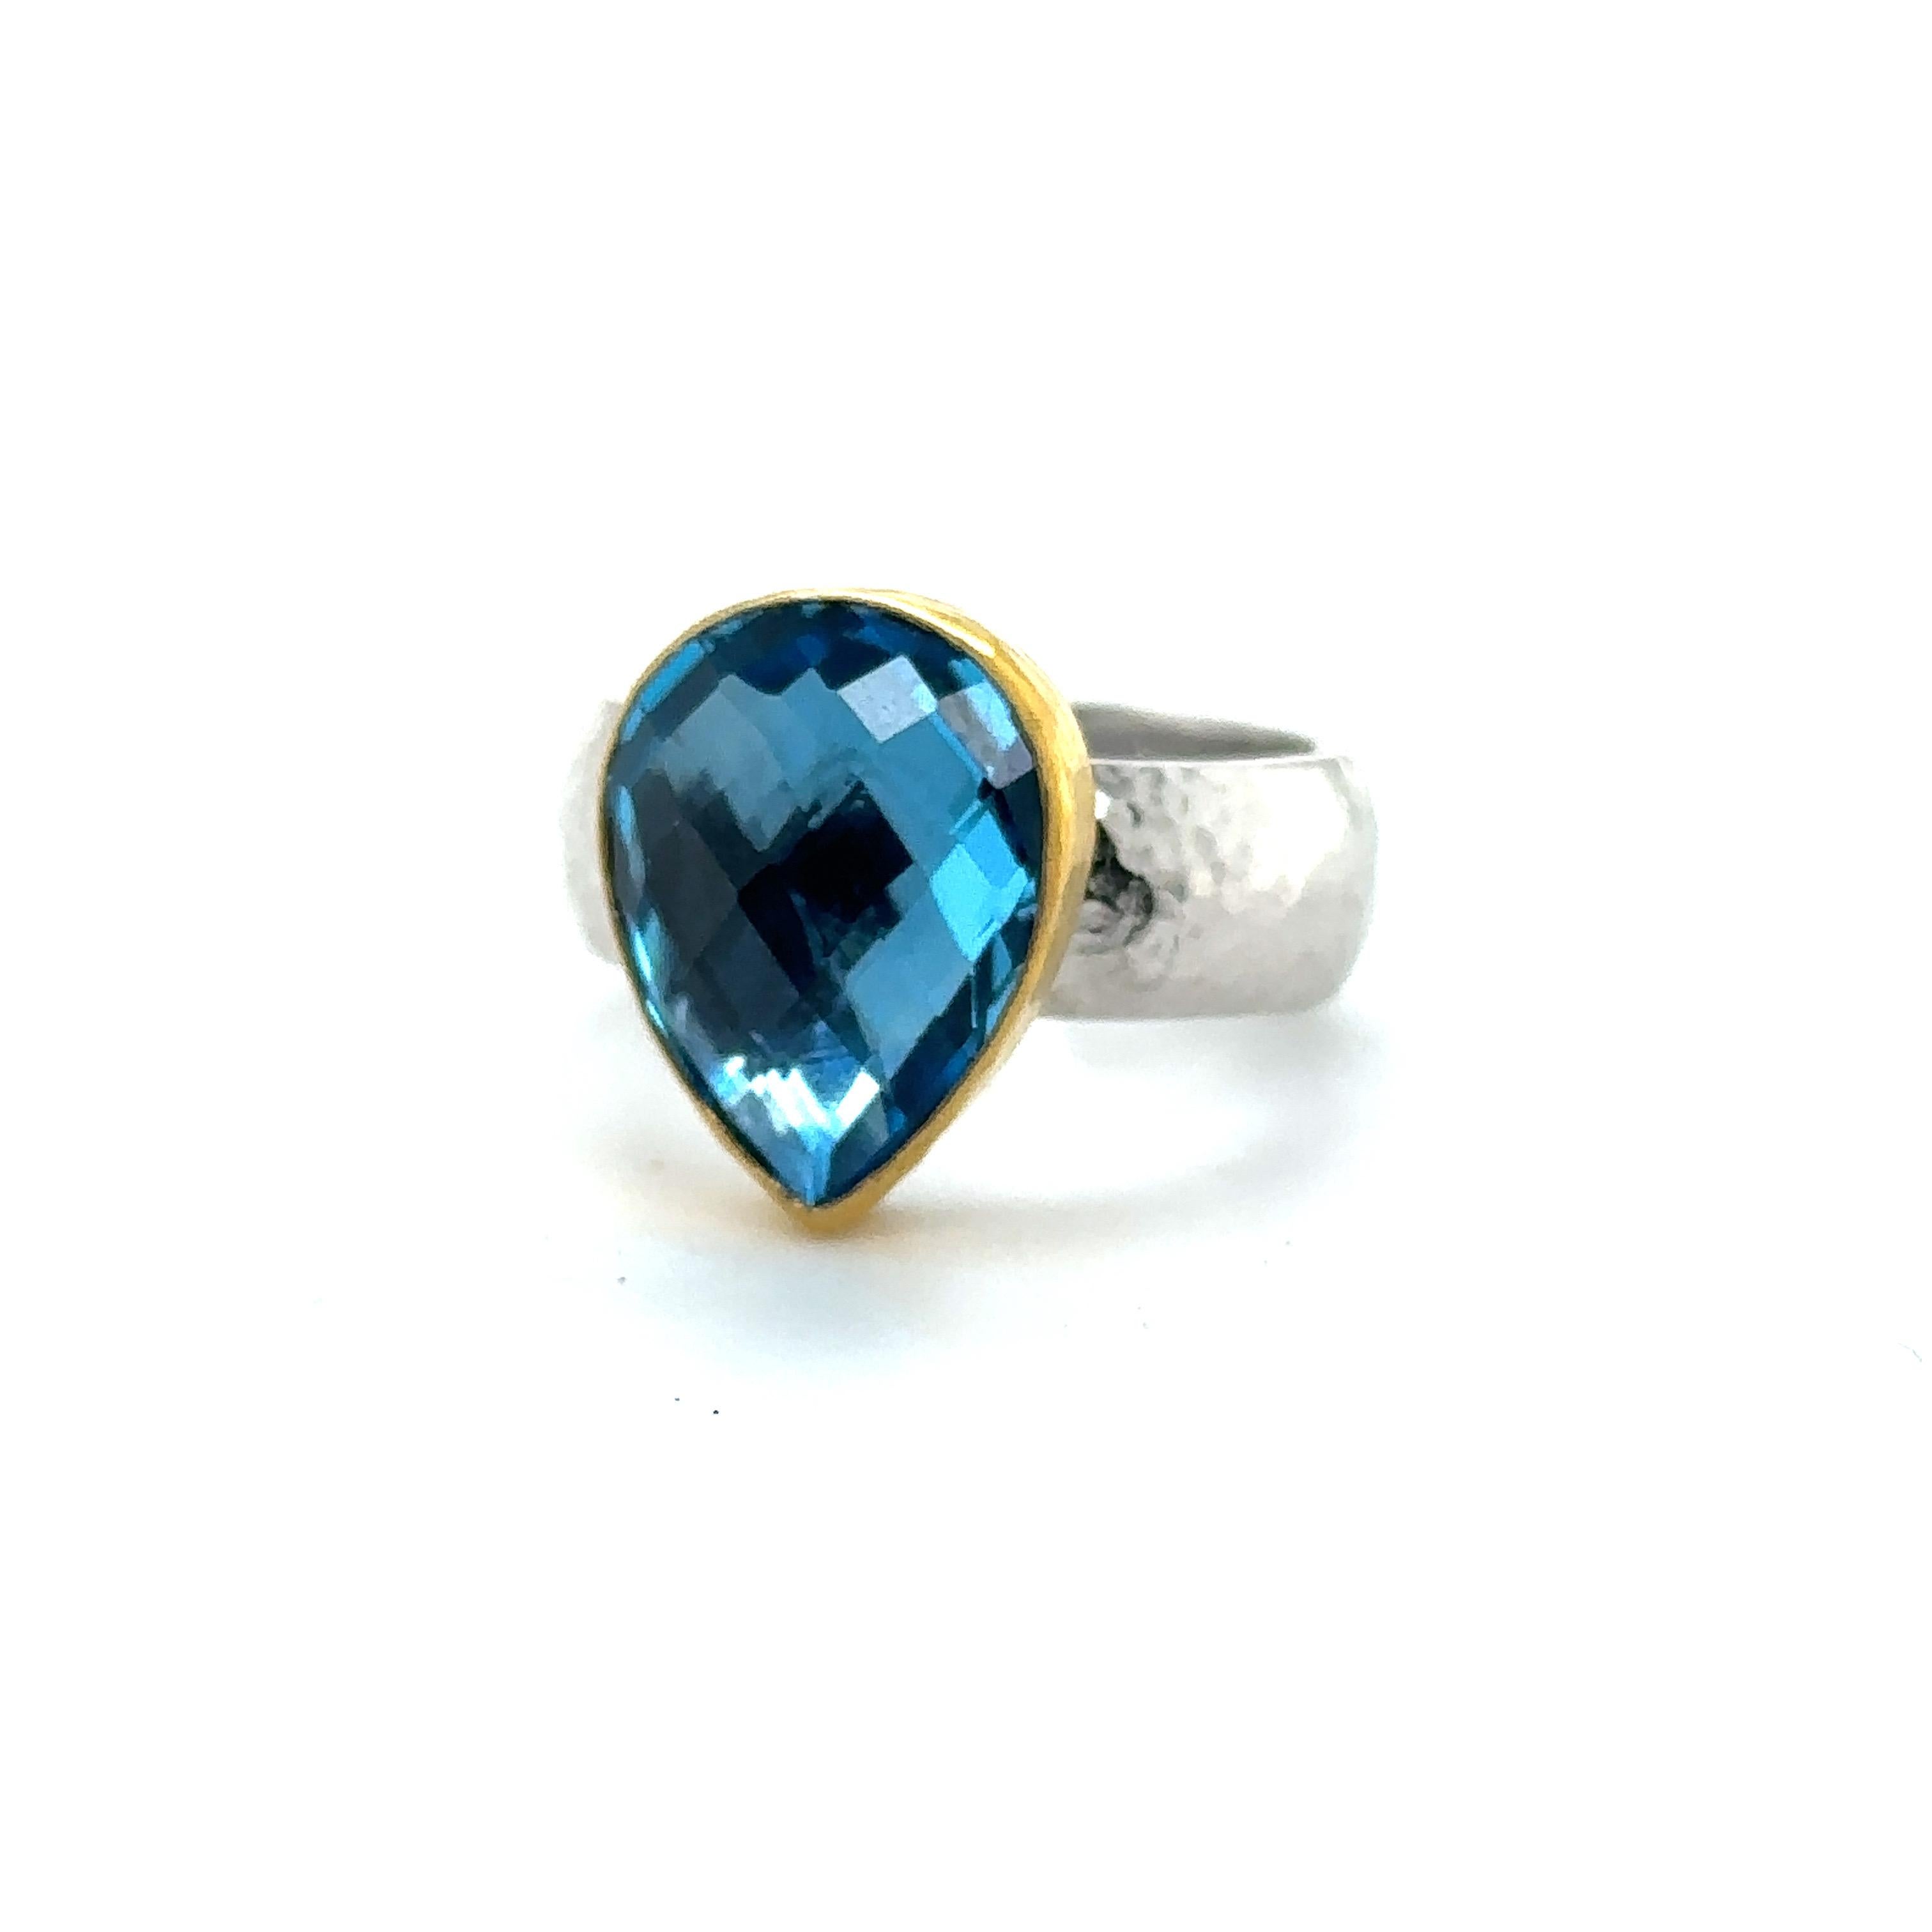 Women's JAS-19-1918 - 24KT GOLD/SS RING with PEAR SHAPE SWISS BLUE TOPAZ For Sale